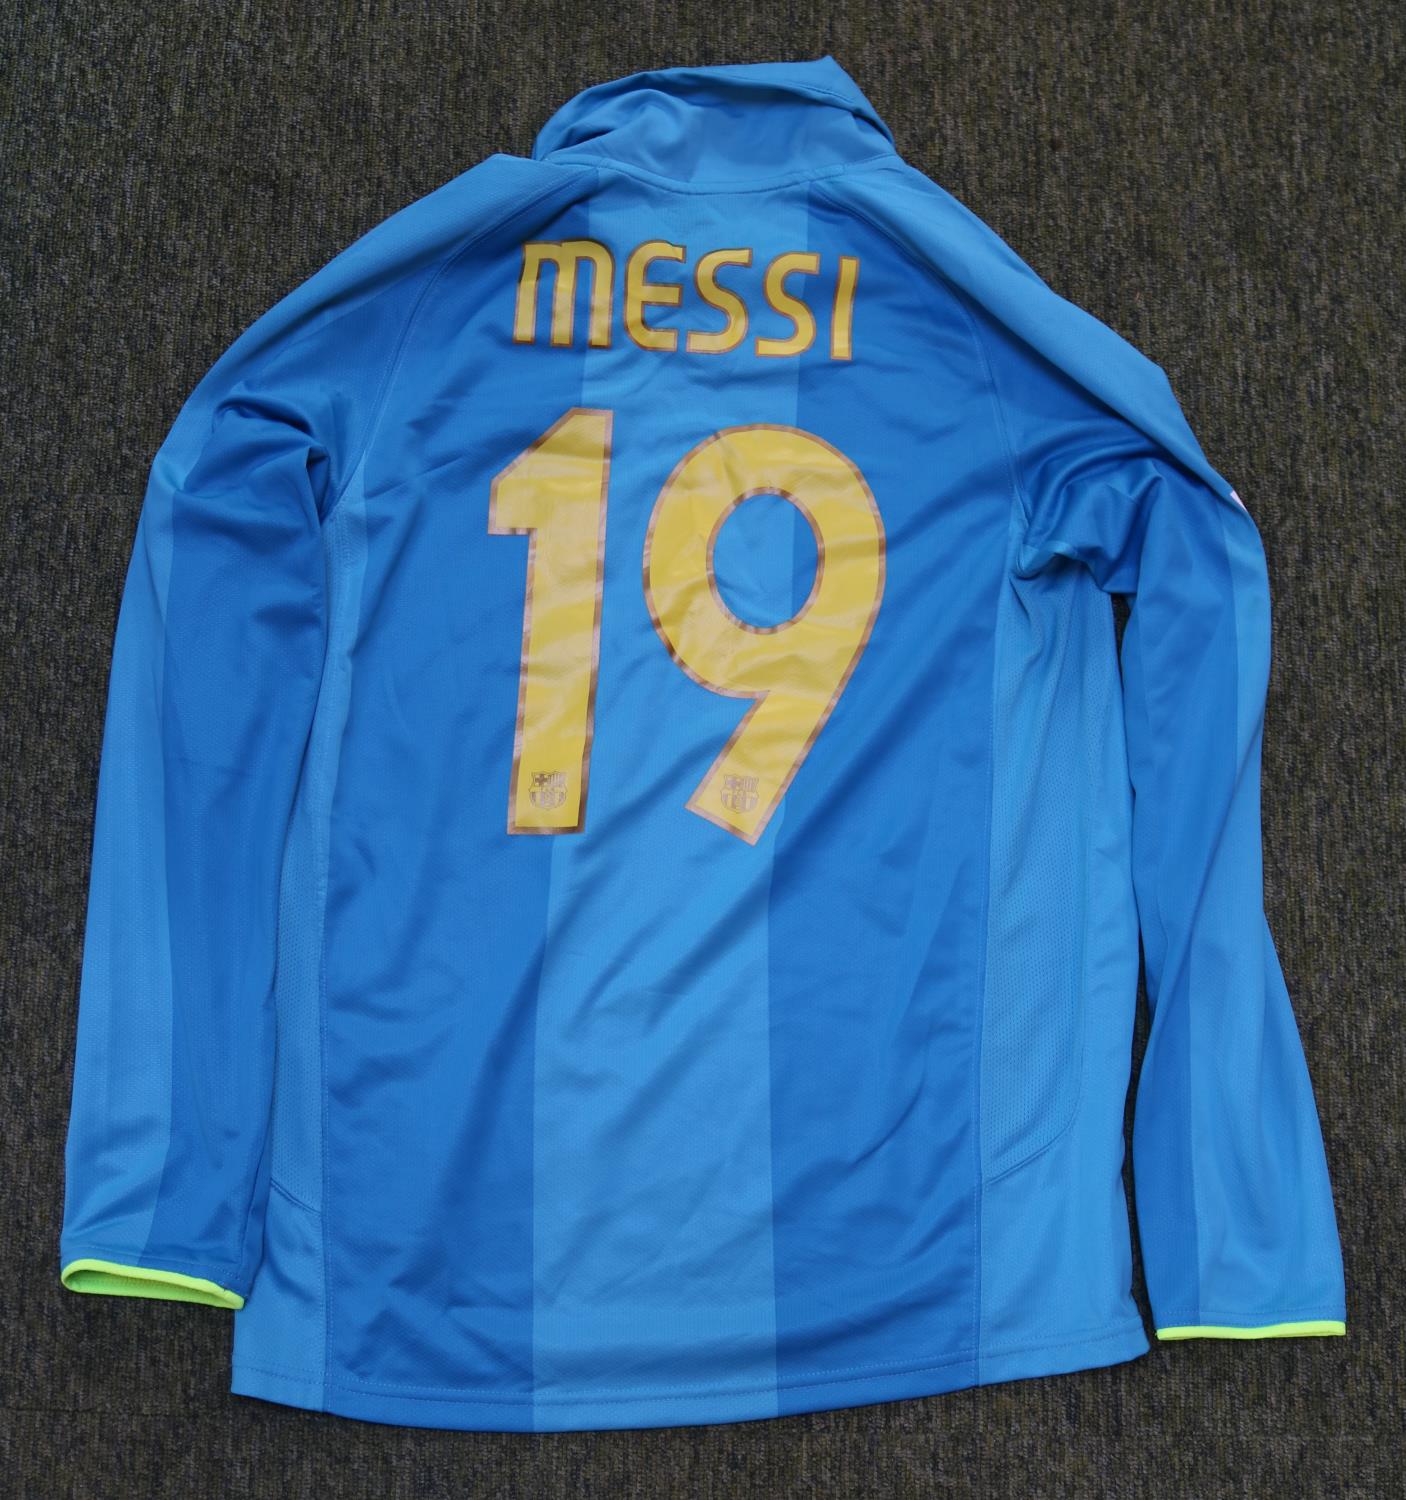 LIONEL MESSI 2008/2009 MATCH WORN #19 BARCELONA AWAY JERSEY Lionel Messi wore this number "19" - Image 6 of 9